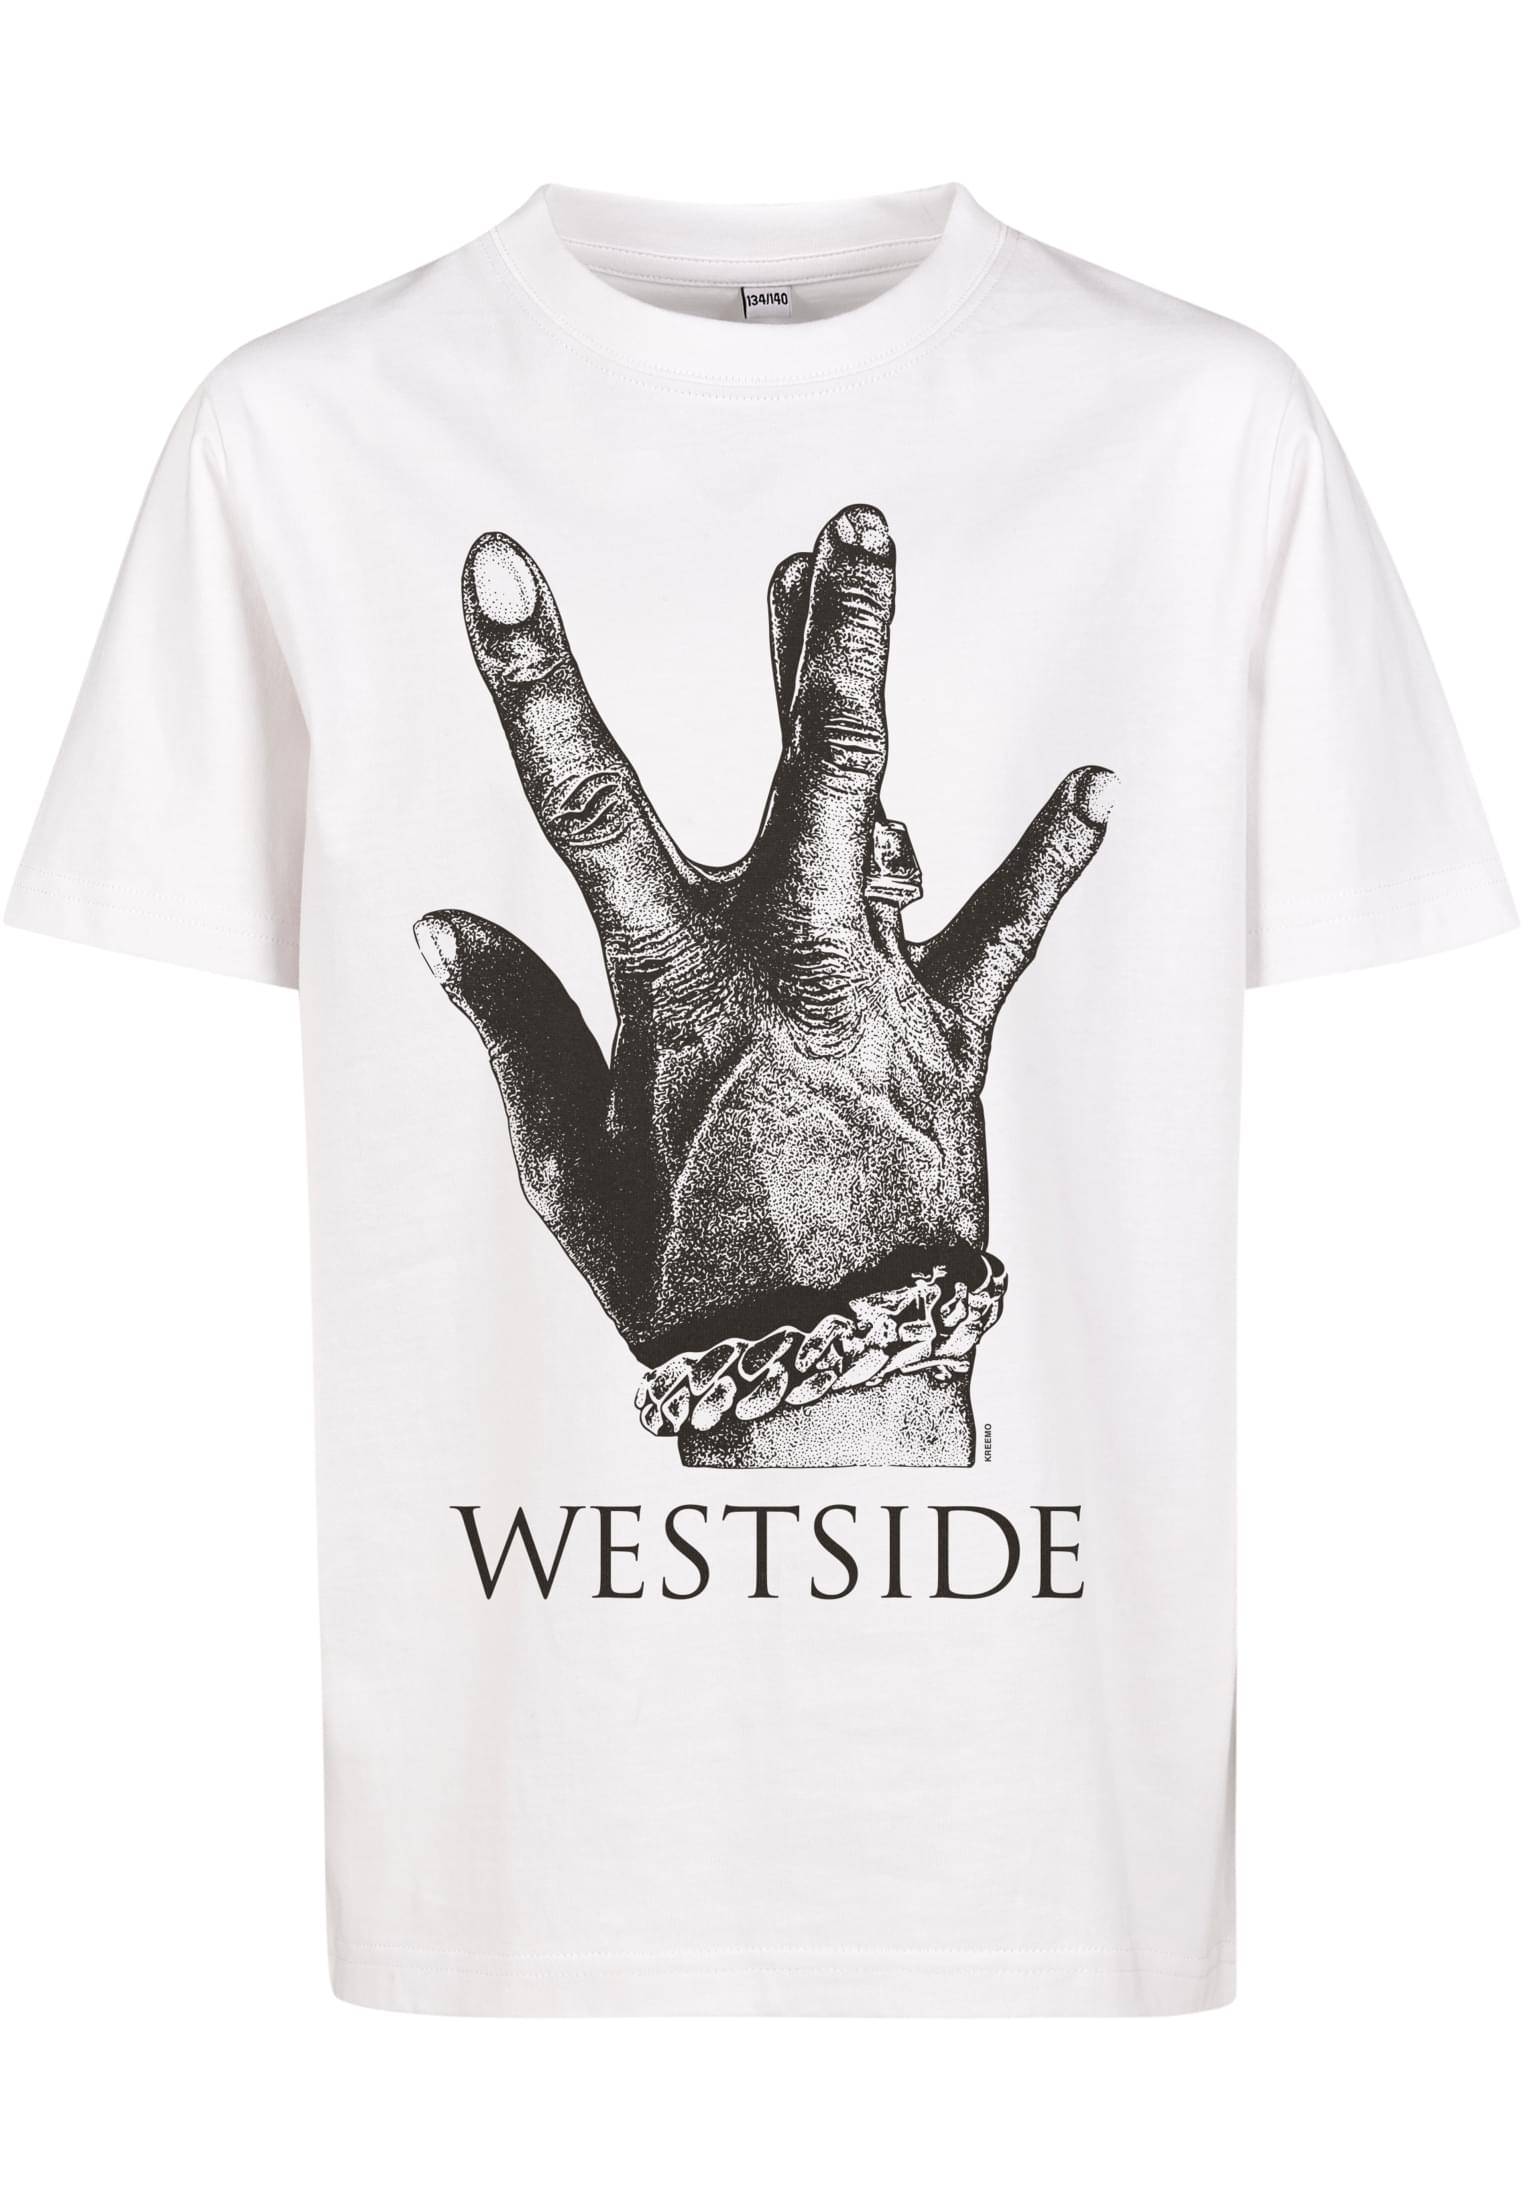 Kids Westside Connection 2.0 T-Shirt White